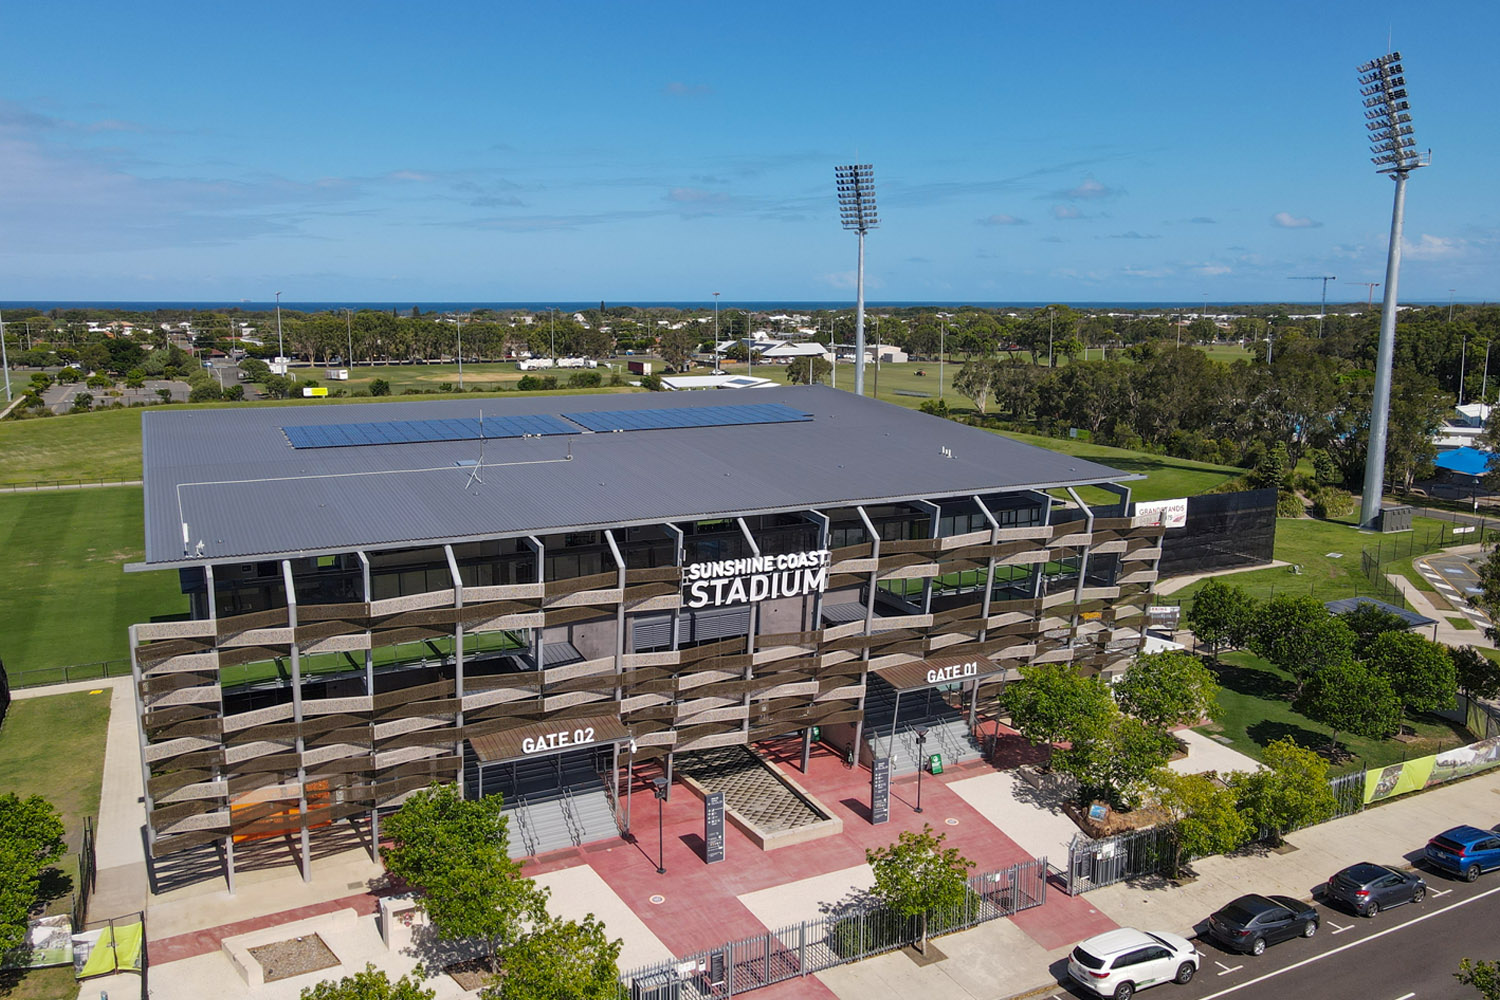 Sunshine Coast, Queensland - January 14 2021: Aerial view of Sunshine Coast Stadium located in Kawana Waters that became the temporary home to the Melbourne Storm during the Covid 19 pandemic ; Shutterstock ID 1891862689; purchase_order: -; job: -; client: -; other: -